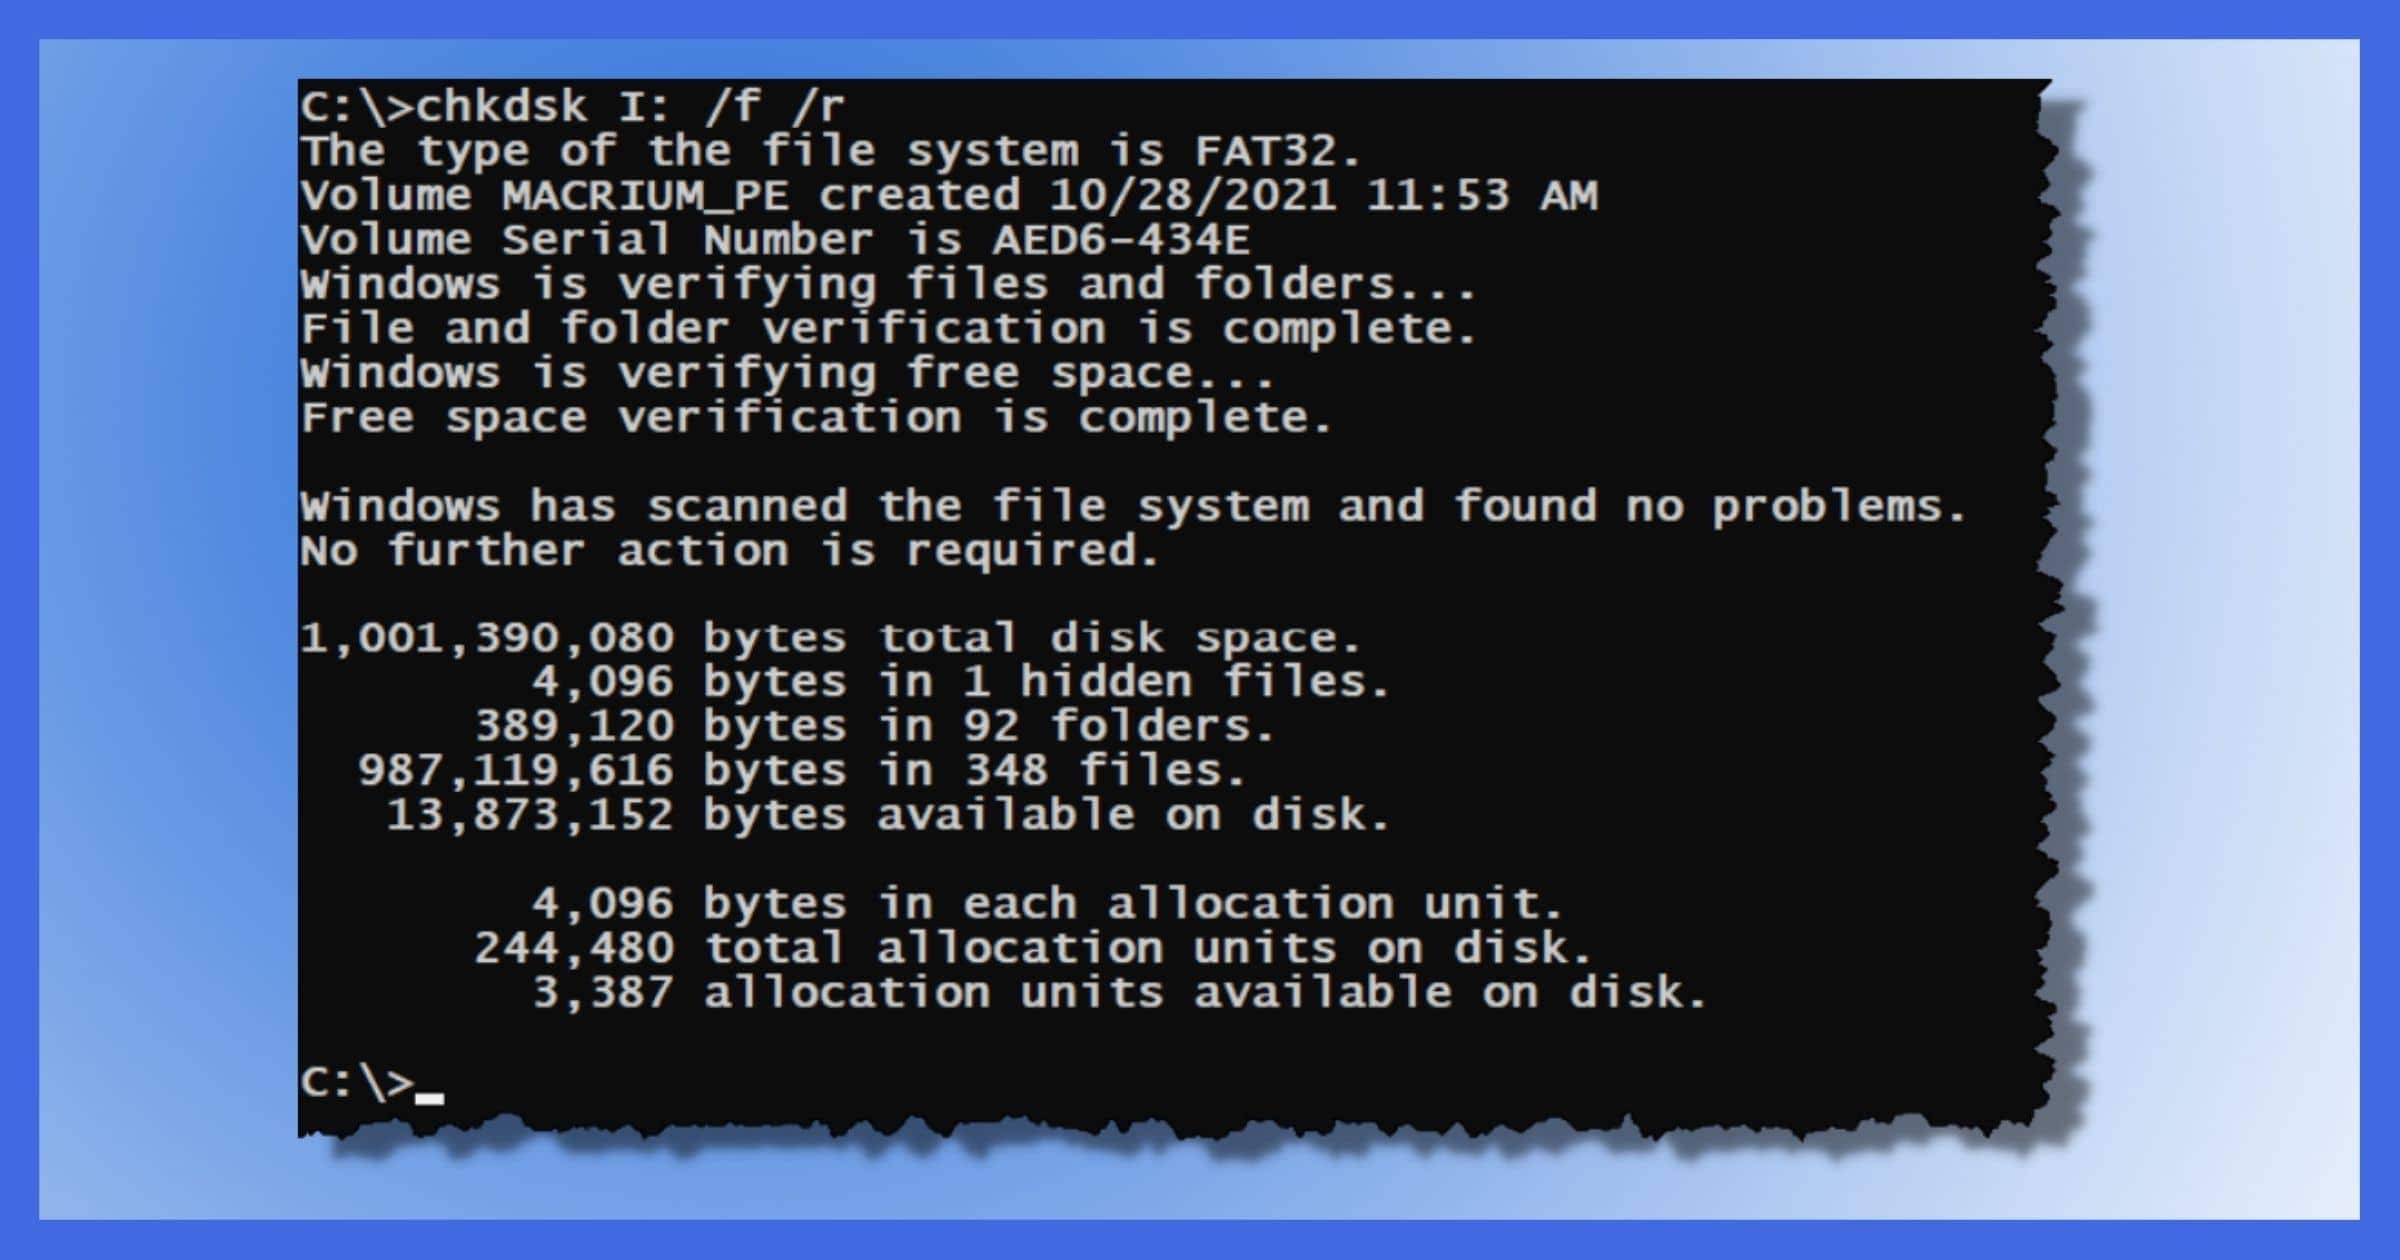 an example of chkdsk